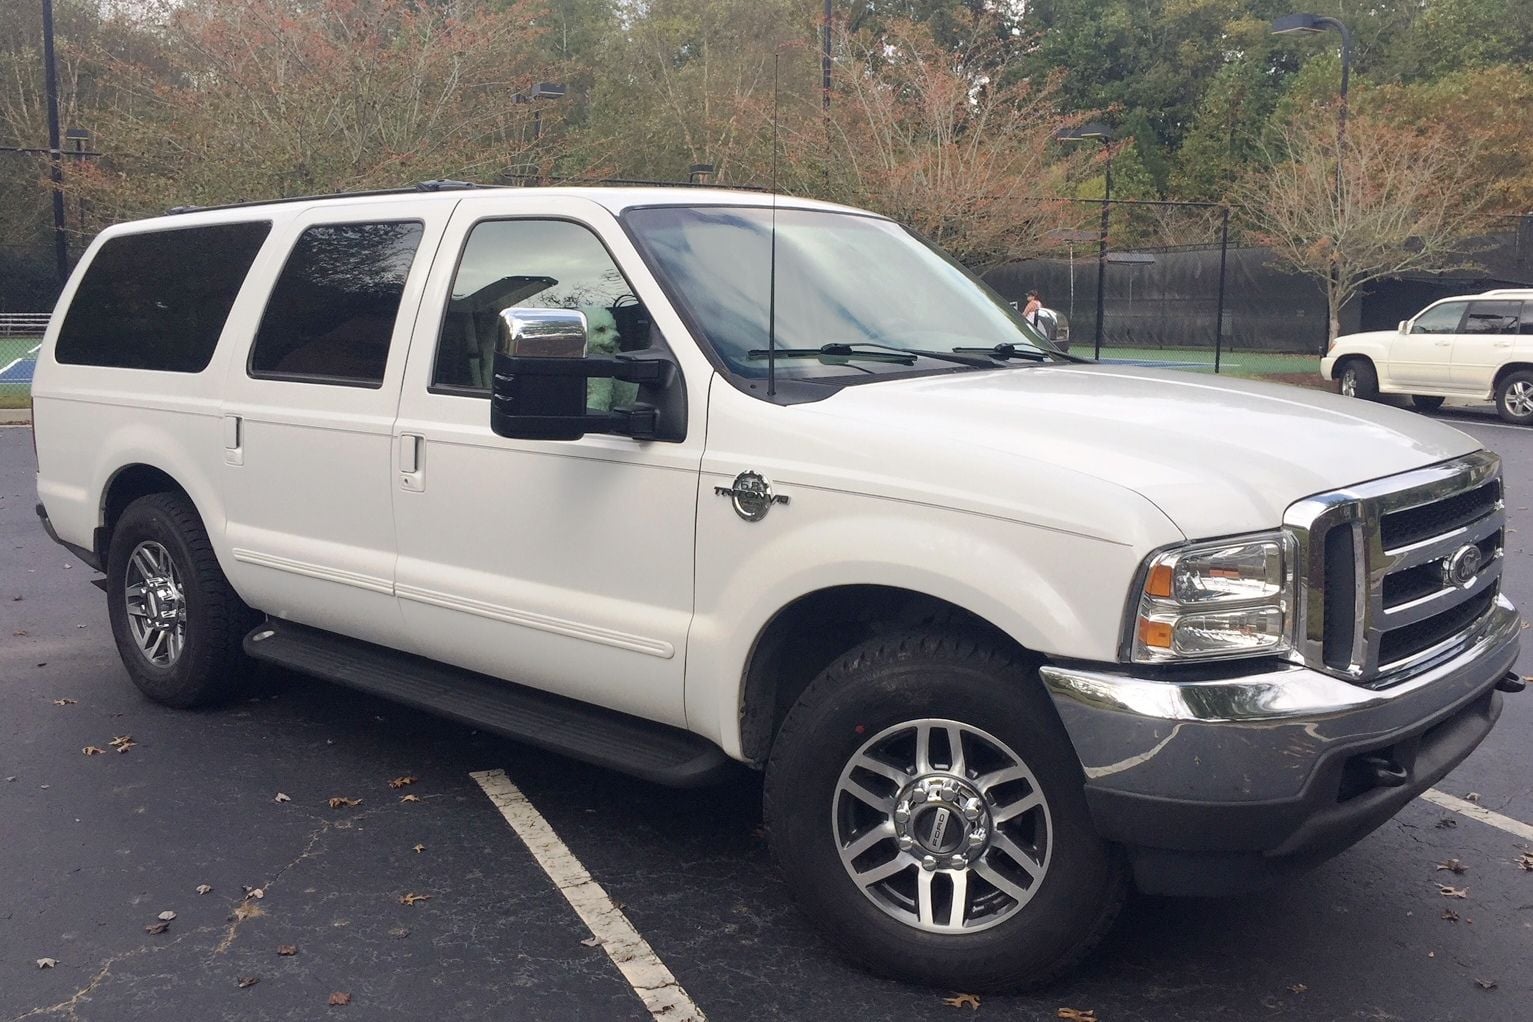 2000 Ford Excursion - 2000 Ford Excursion XLT 2wd V-10 only 87k original miles - Used - VIN 1FMNU40S24EA46068 - 87,000 Miles - 10 cyl - 2WD - Automatic - SUV - White - Suwanee, GA 30024, United States